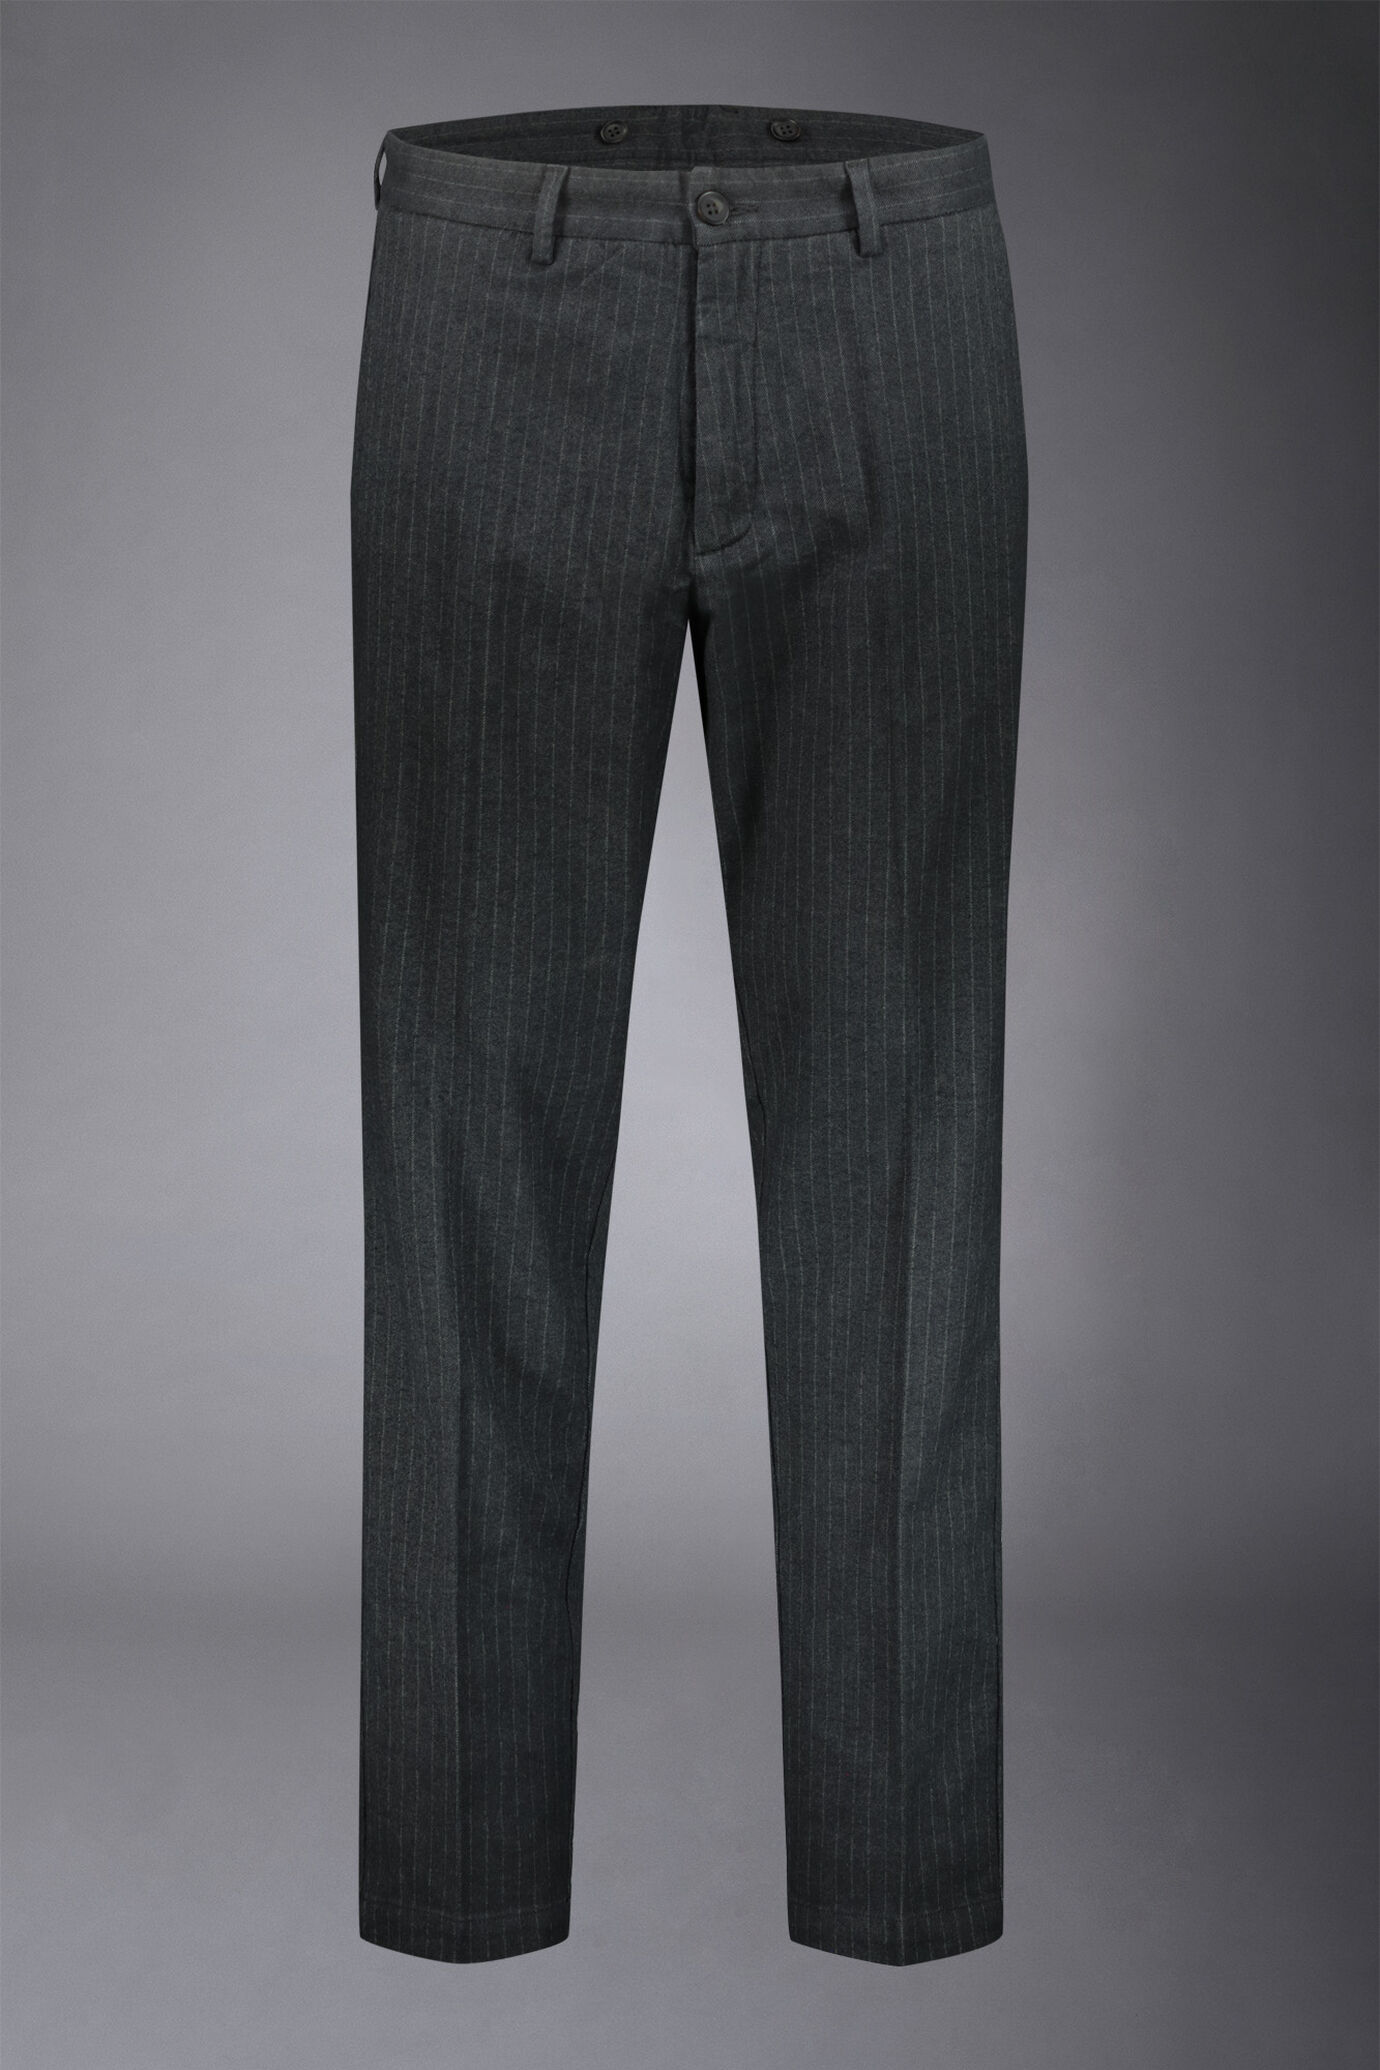 Men's chino pants woven cotton hand wool pinstripe comfort fit image number 4